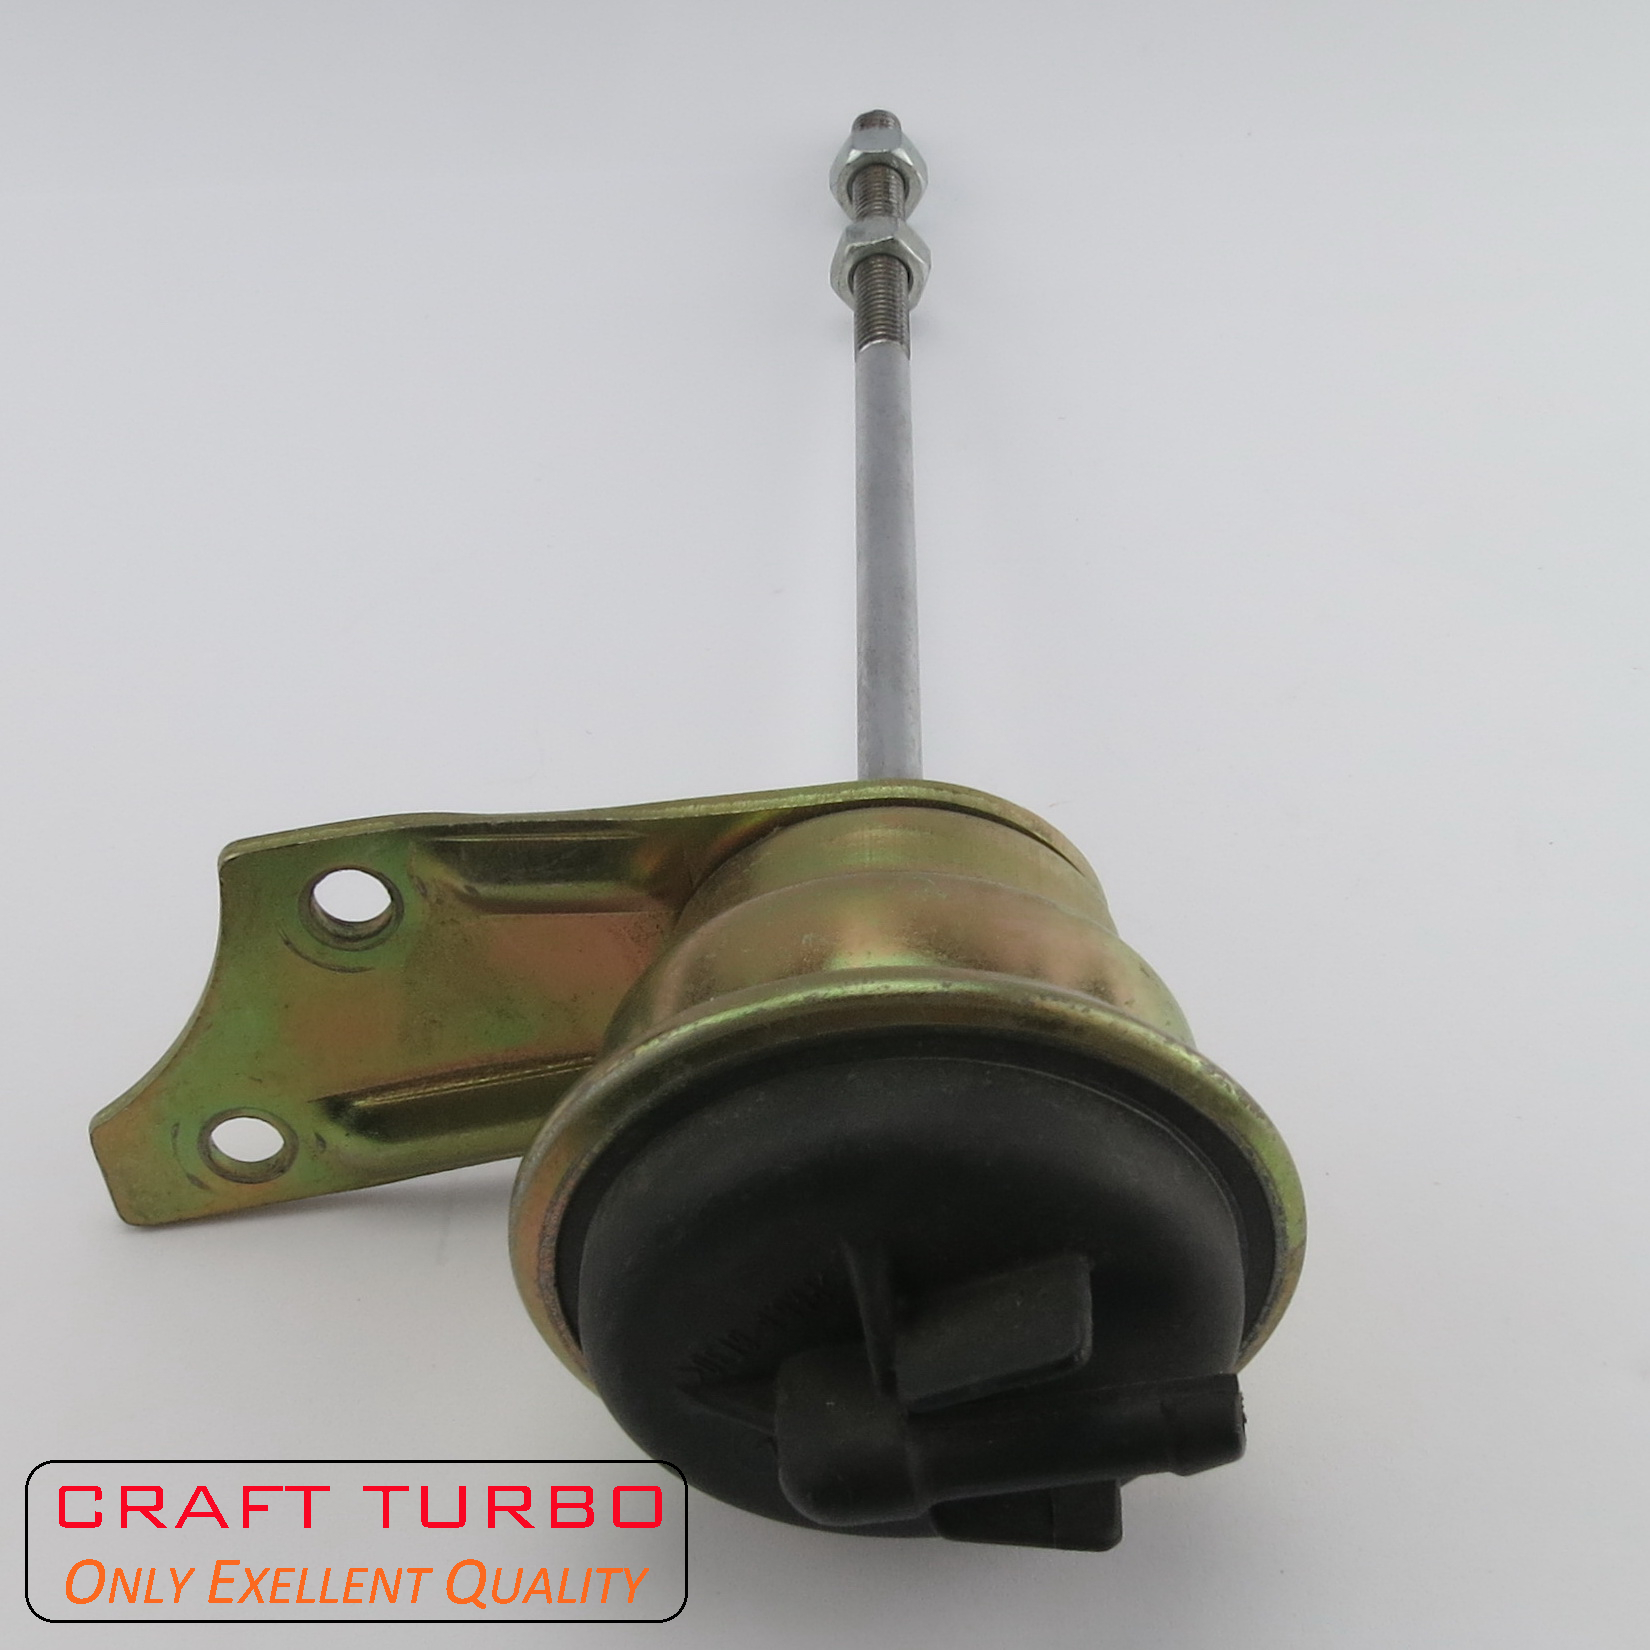 KP35 Actuator for Turbochargers 